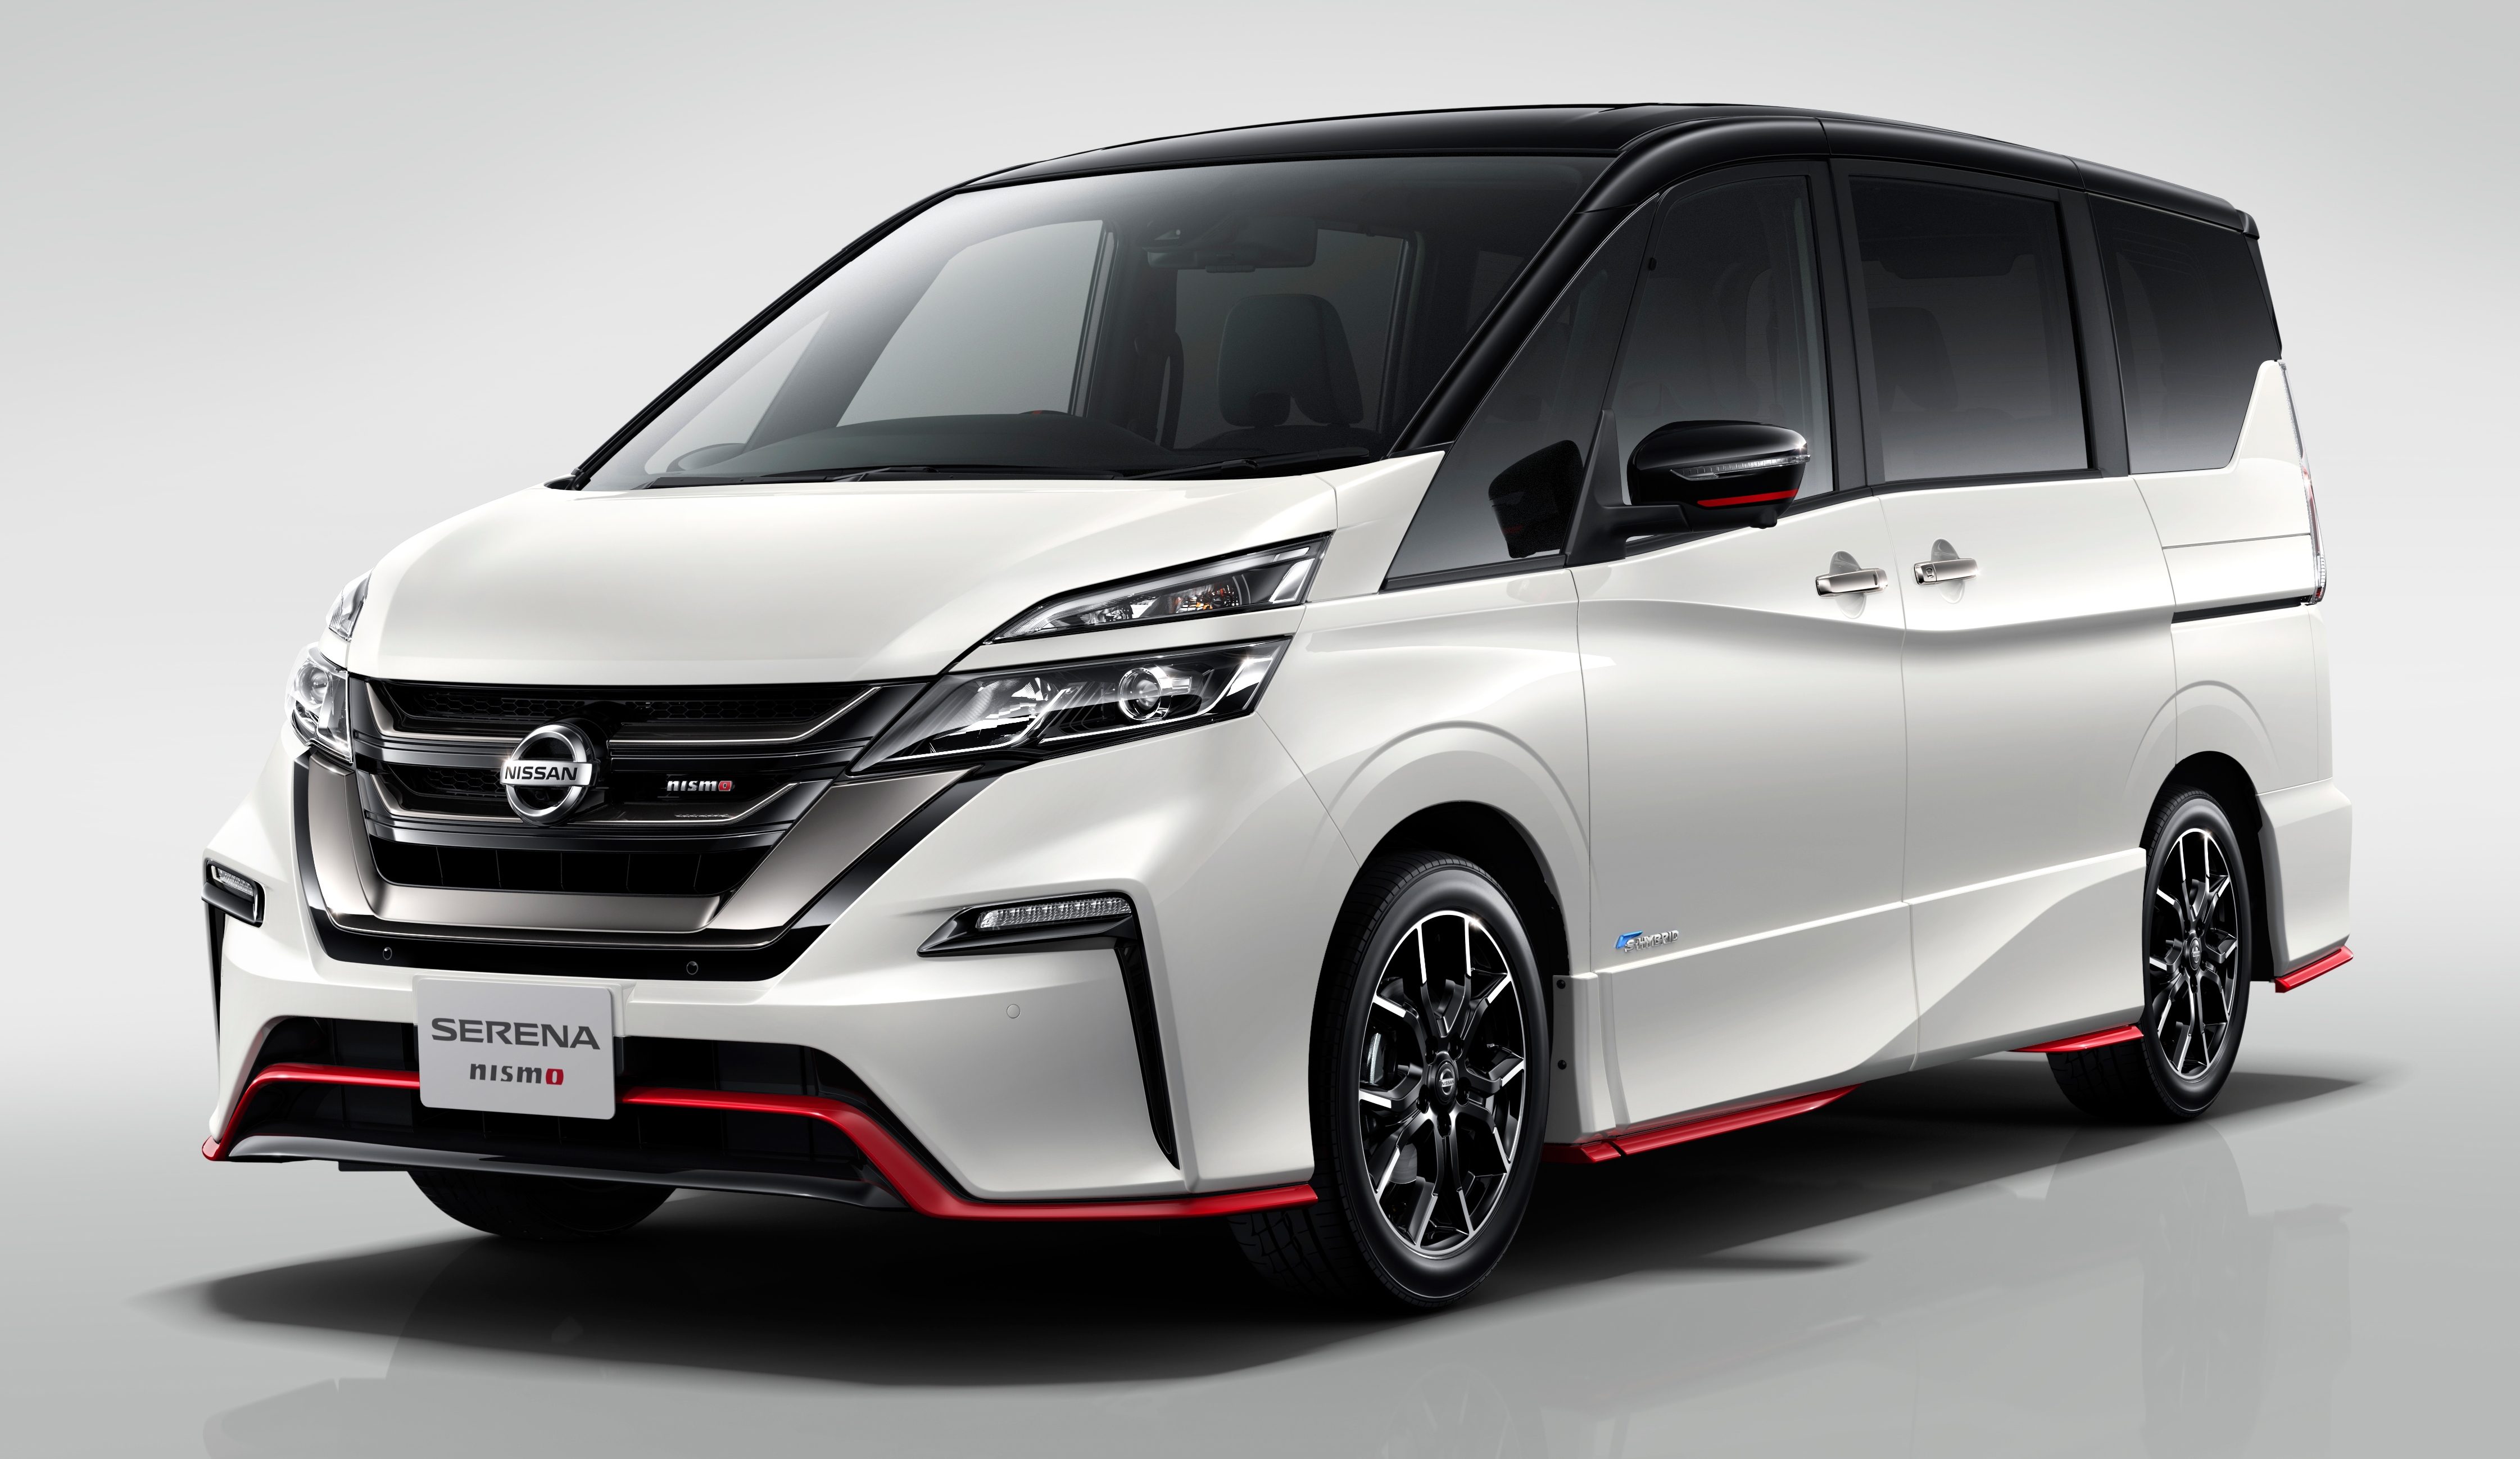 Nissan Serena Nismo makes for a sportier proposition